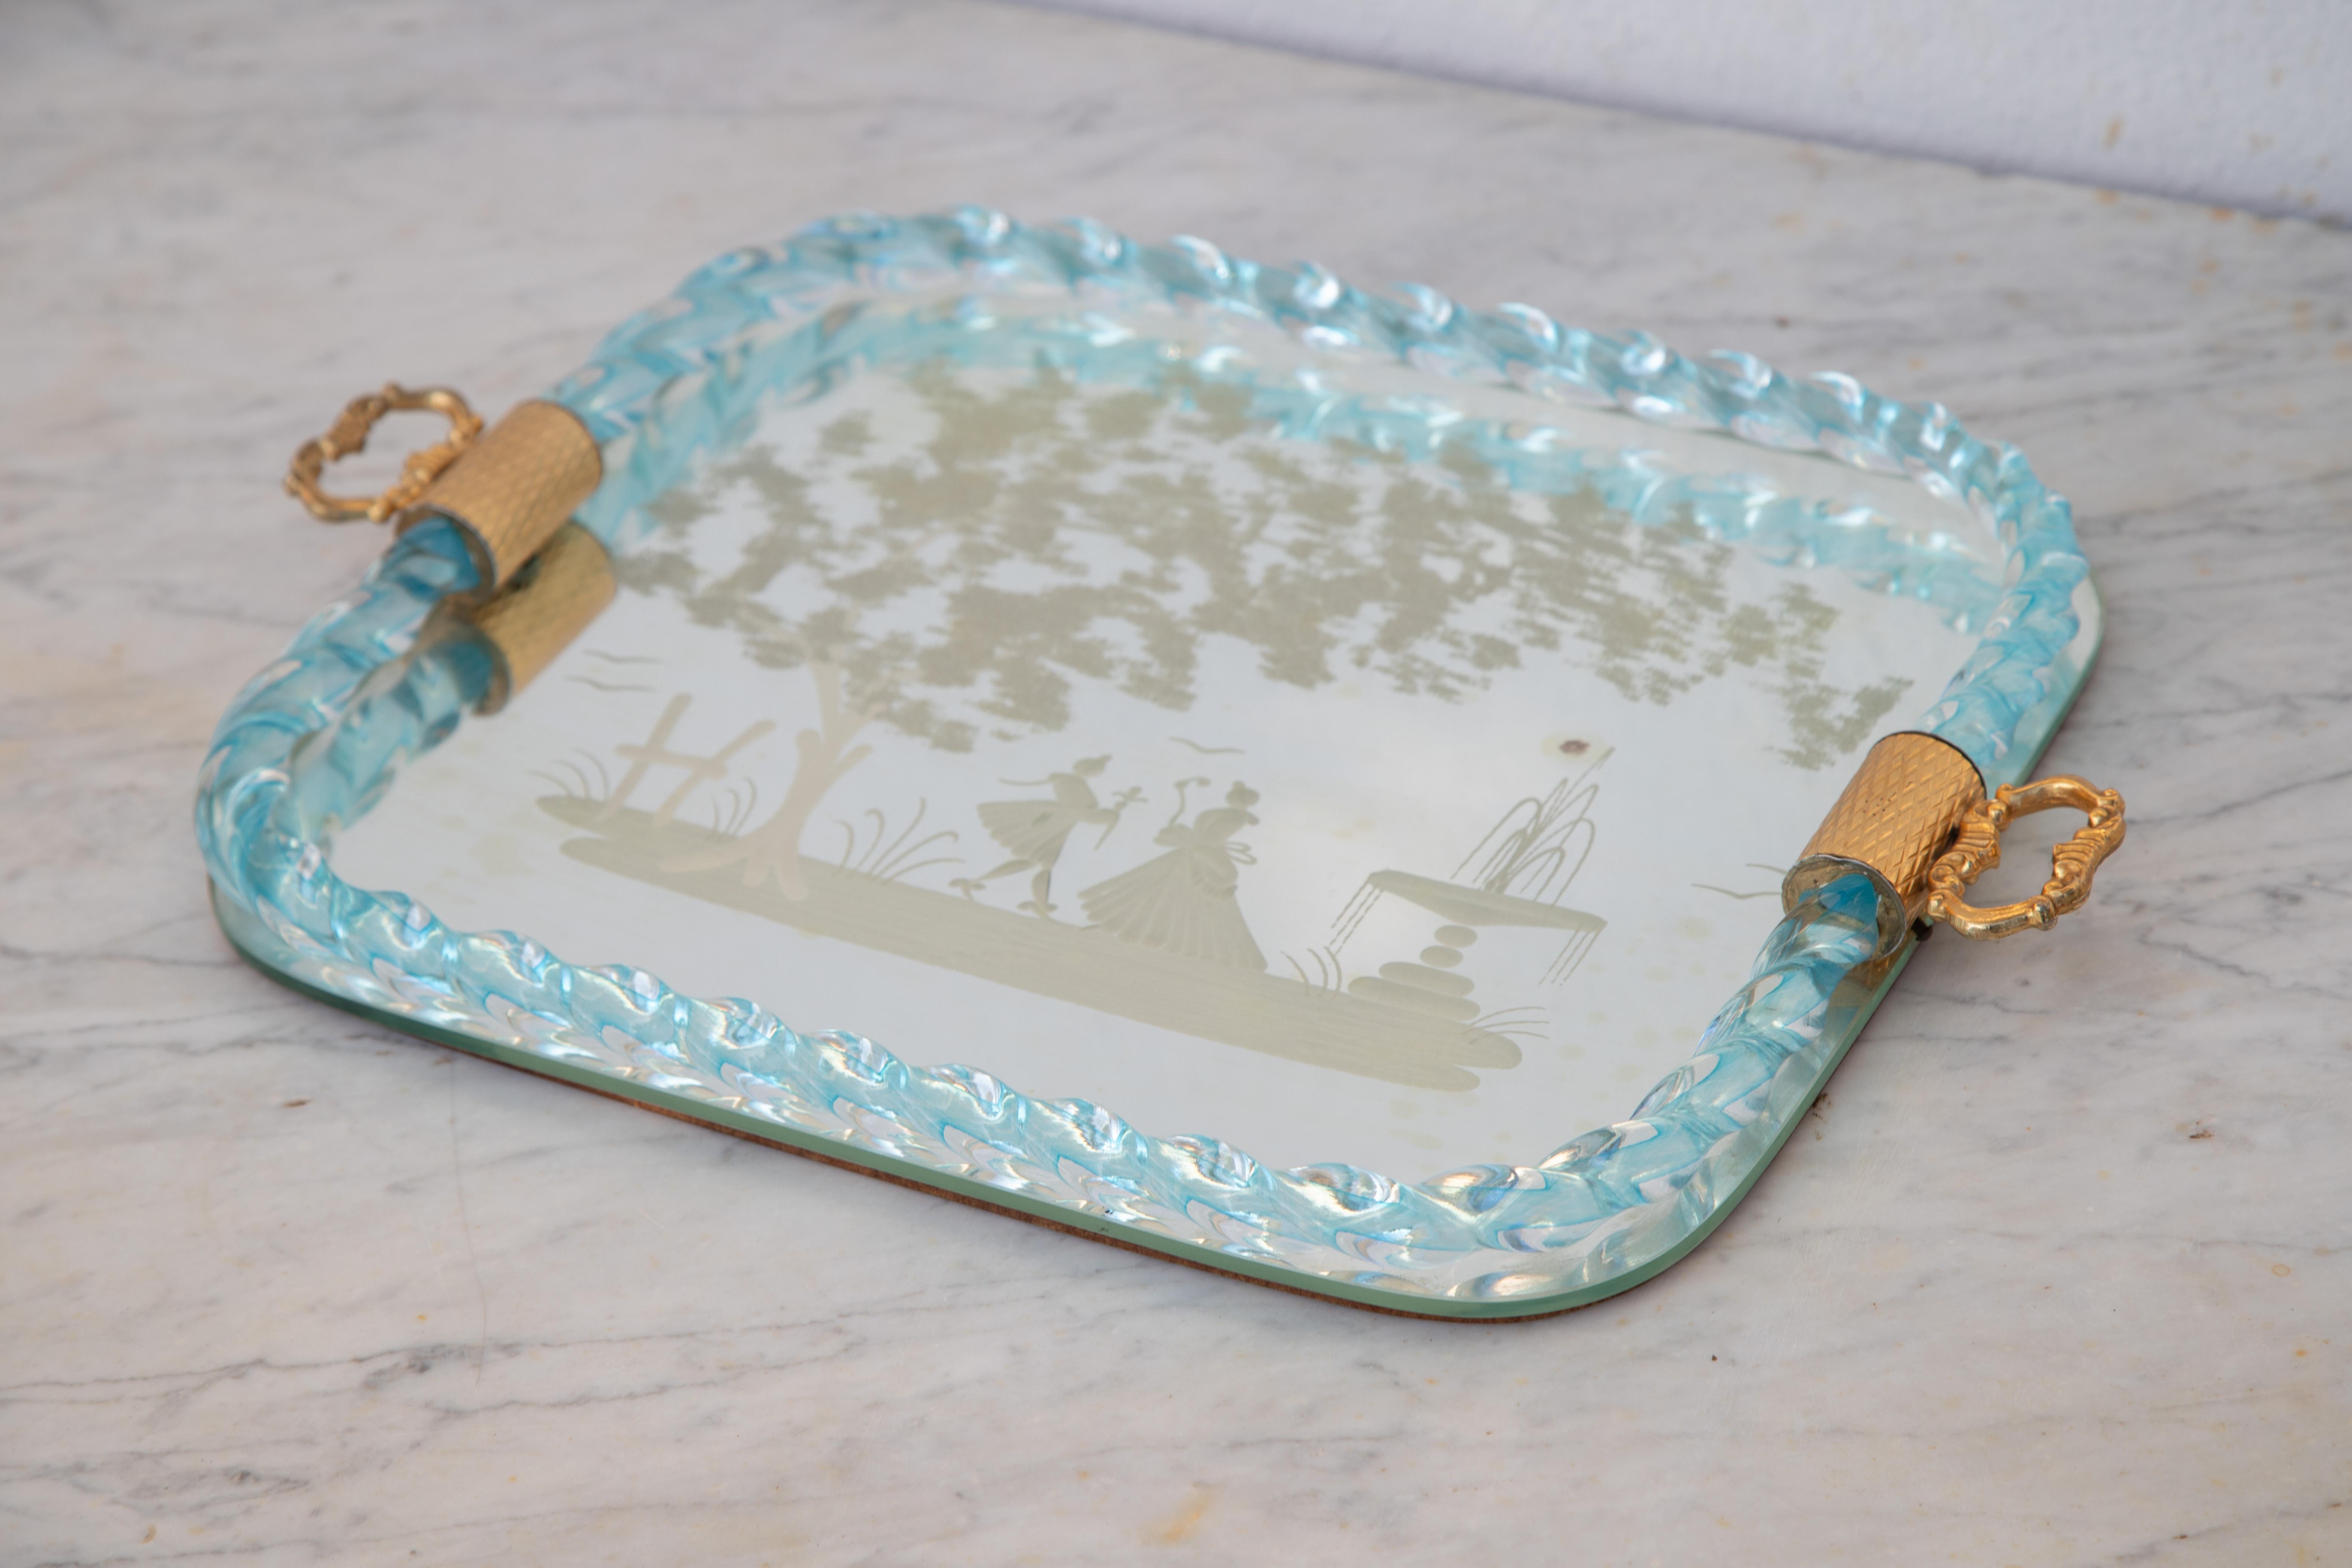 Ercole Barovier Mirror-Engraved Murano Glass Italian Serving Tray, 1940s In Good Condition For Sale In Roma, IT